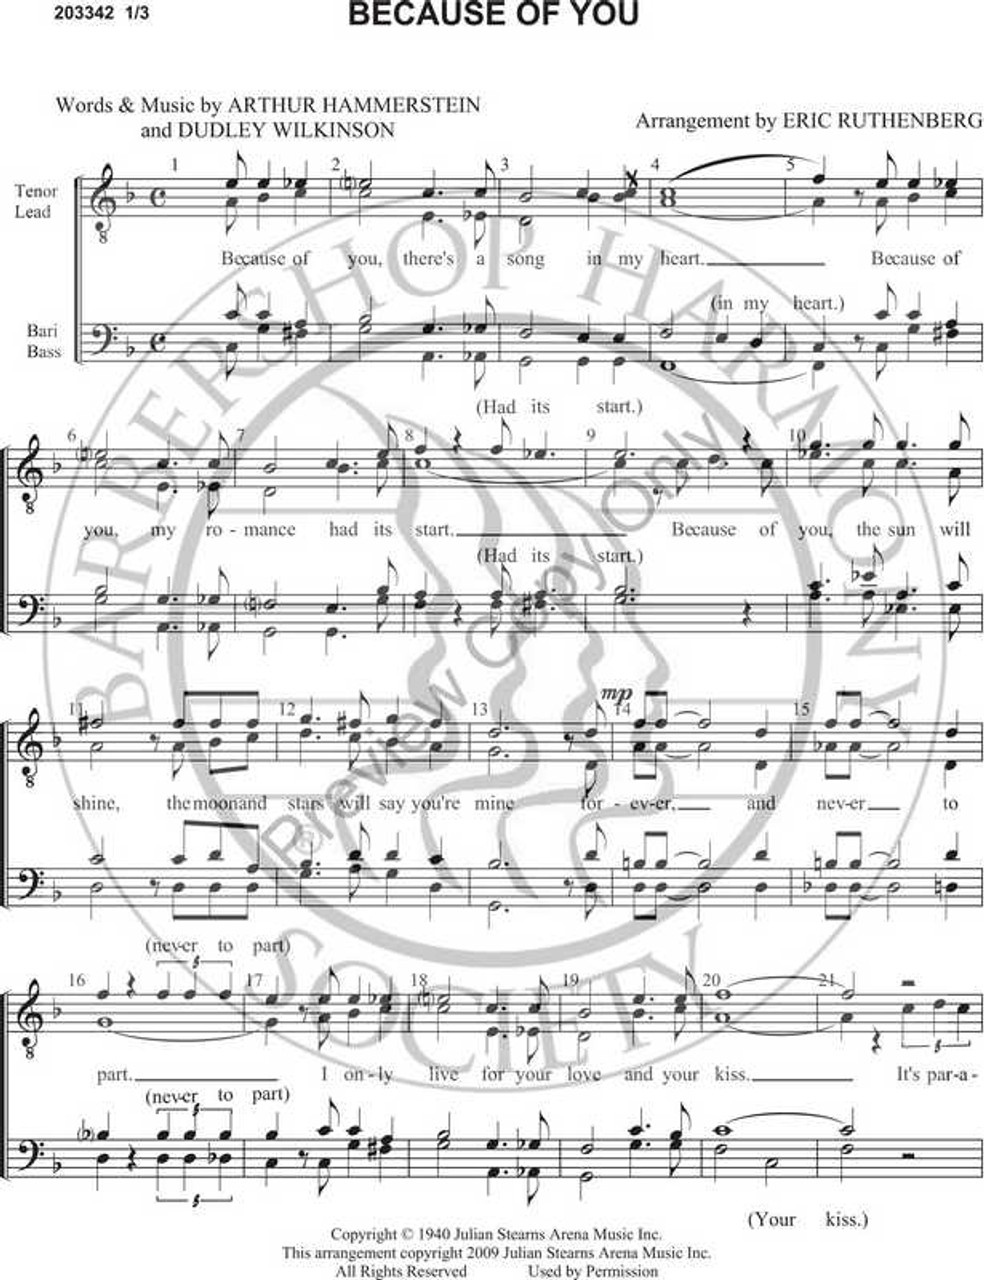 Because of You 1 (TTBB) (arr. Eric Ruthenberg)-Download-UNPUB